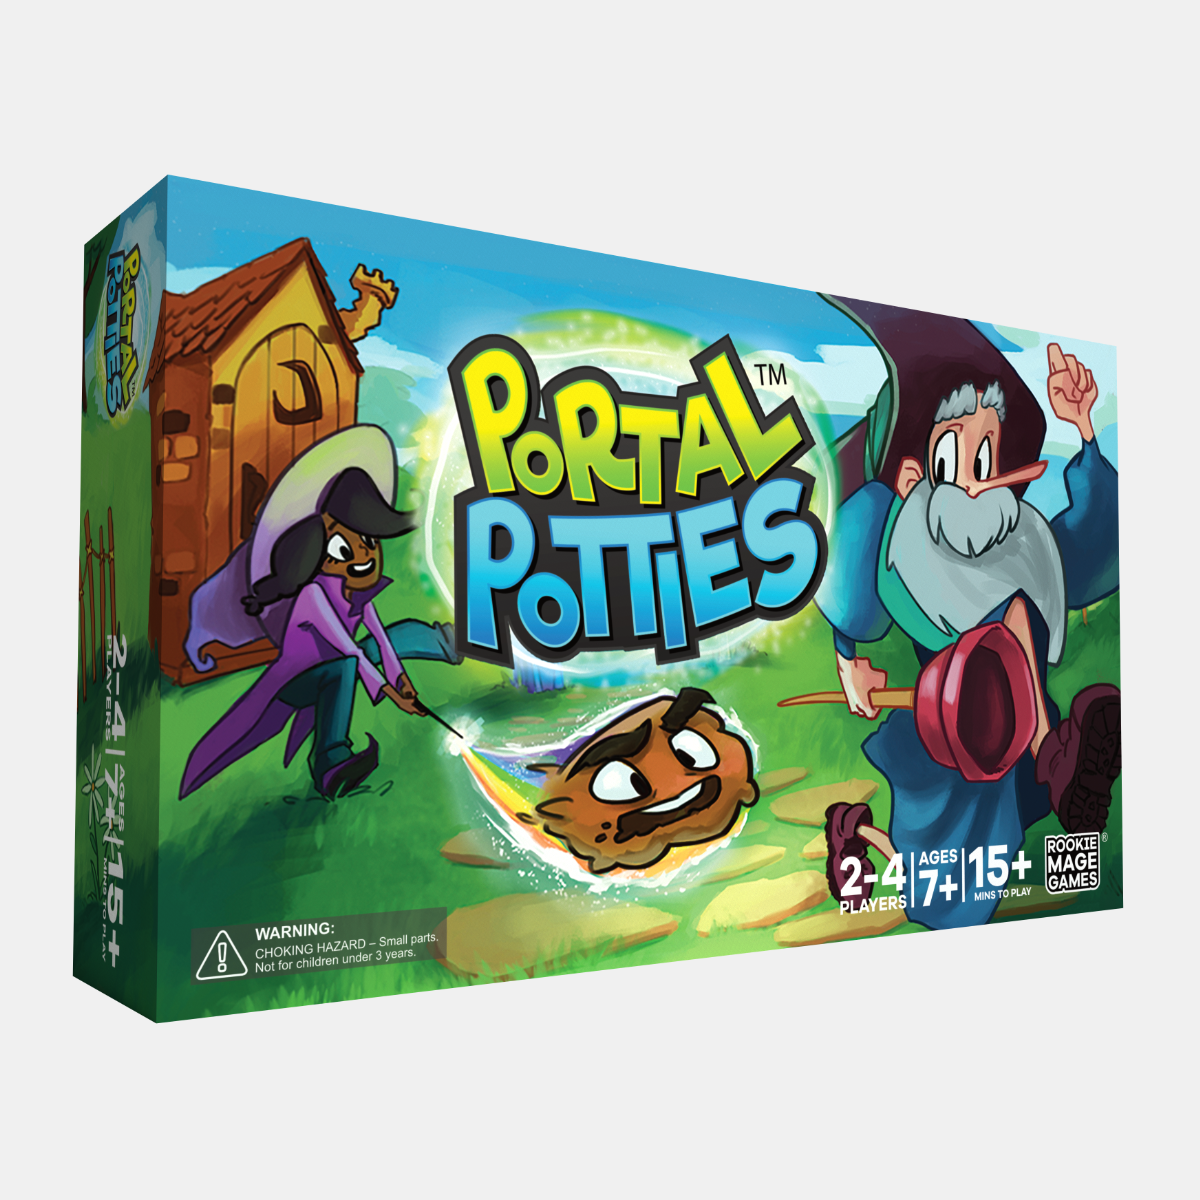 PORTAL POTTIES - A Game About Wizards Who Teleport Poop